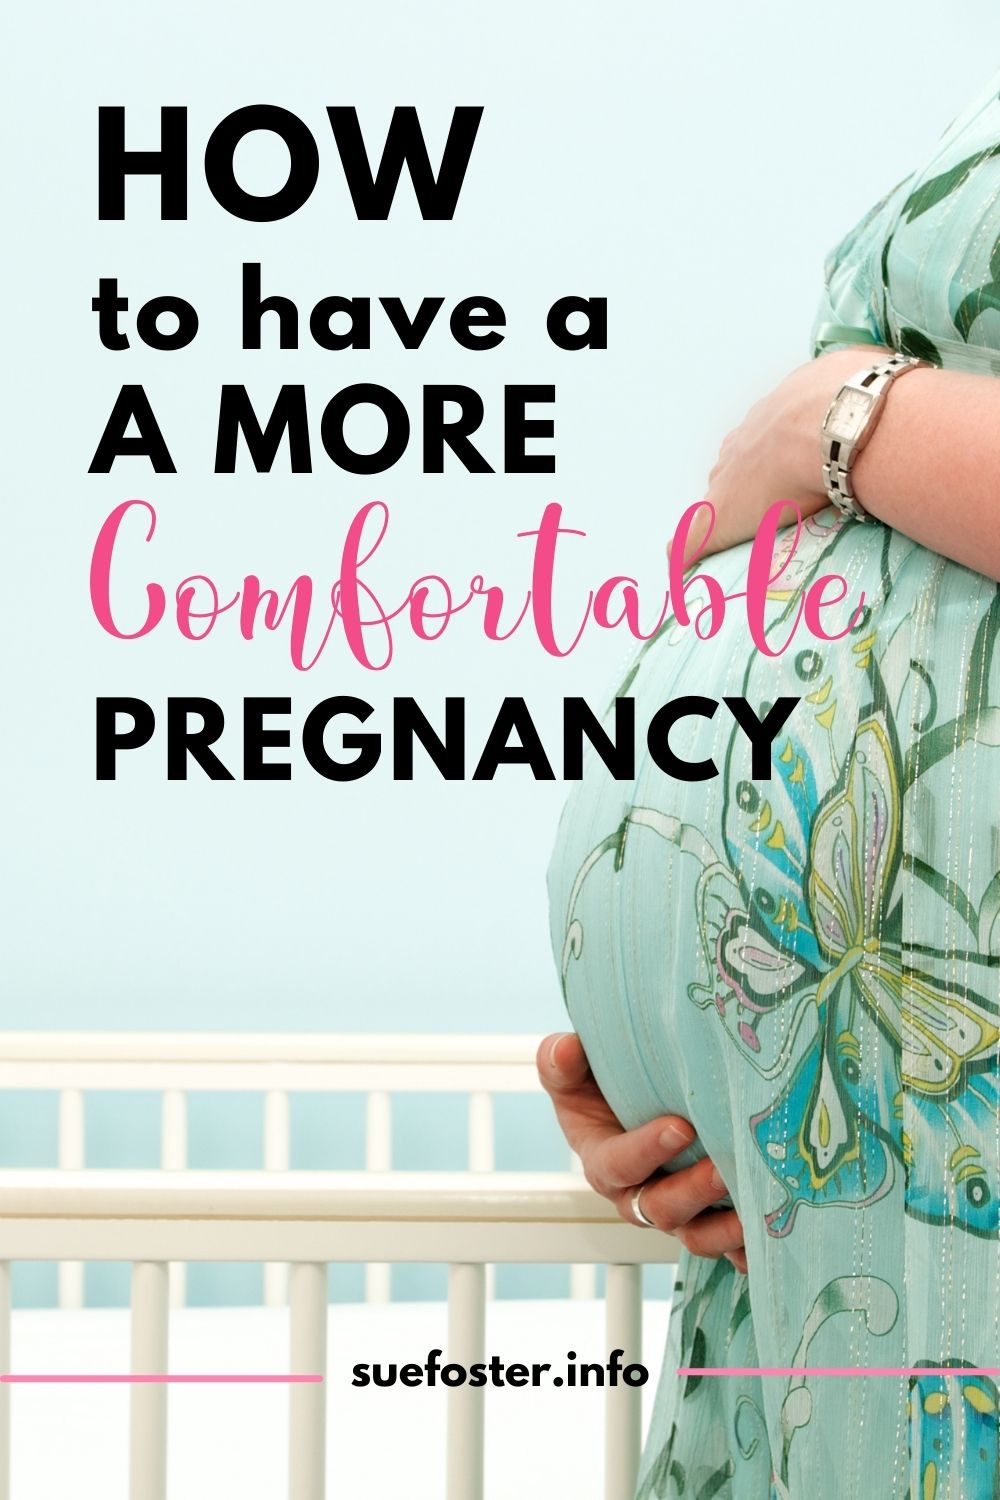 If you are expecting - or plan to be in the near future - then ensuring optimal comfort and contentment during your pregnancy is well worth exploring.